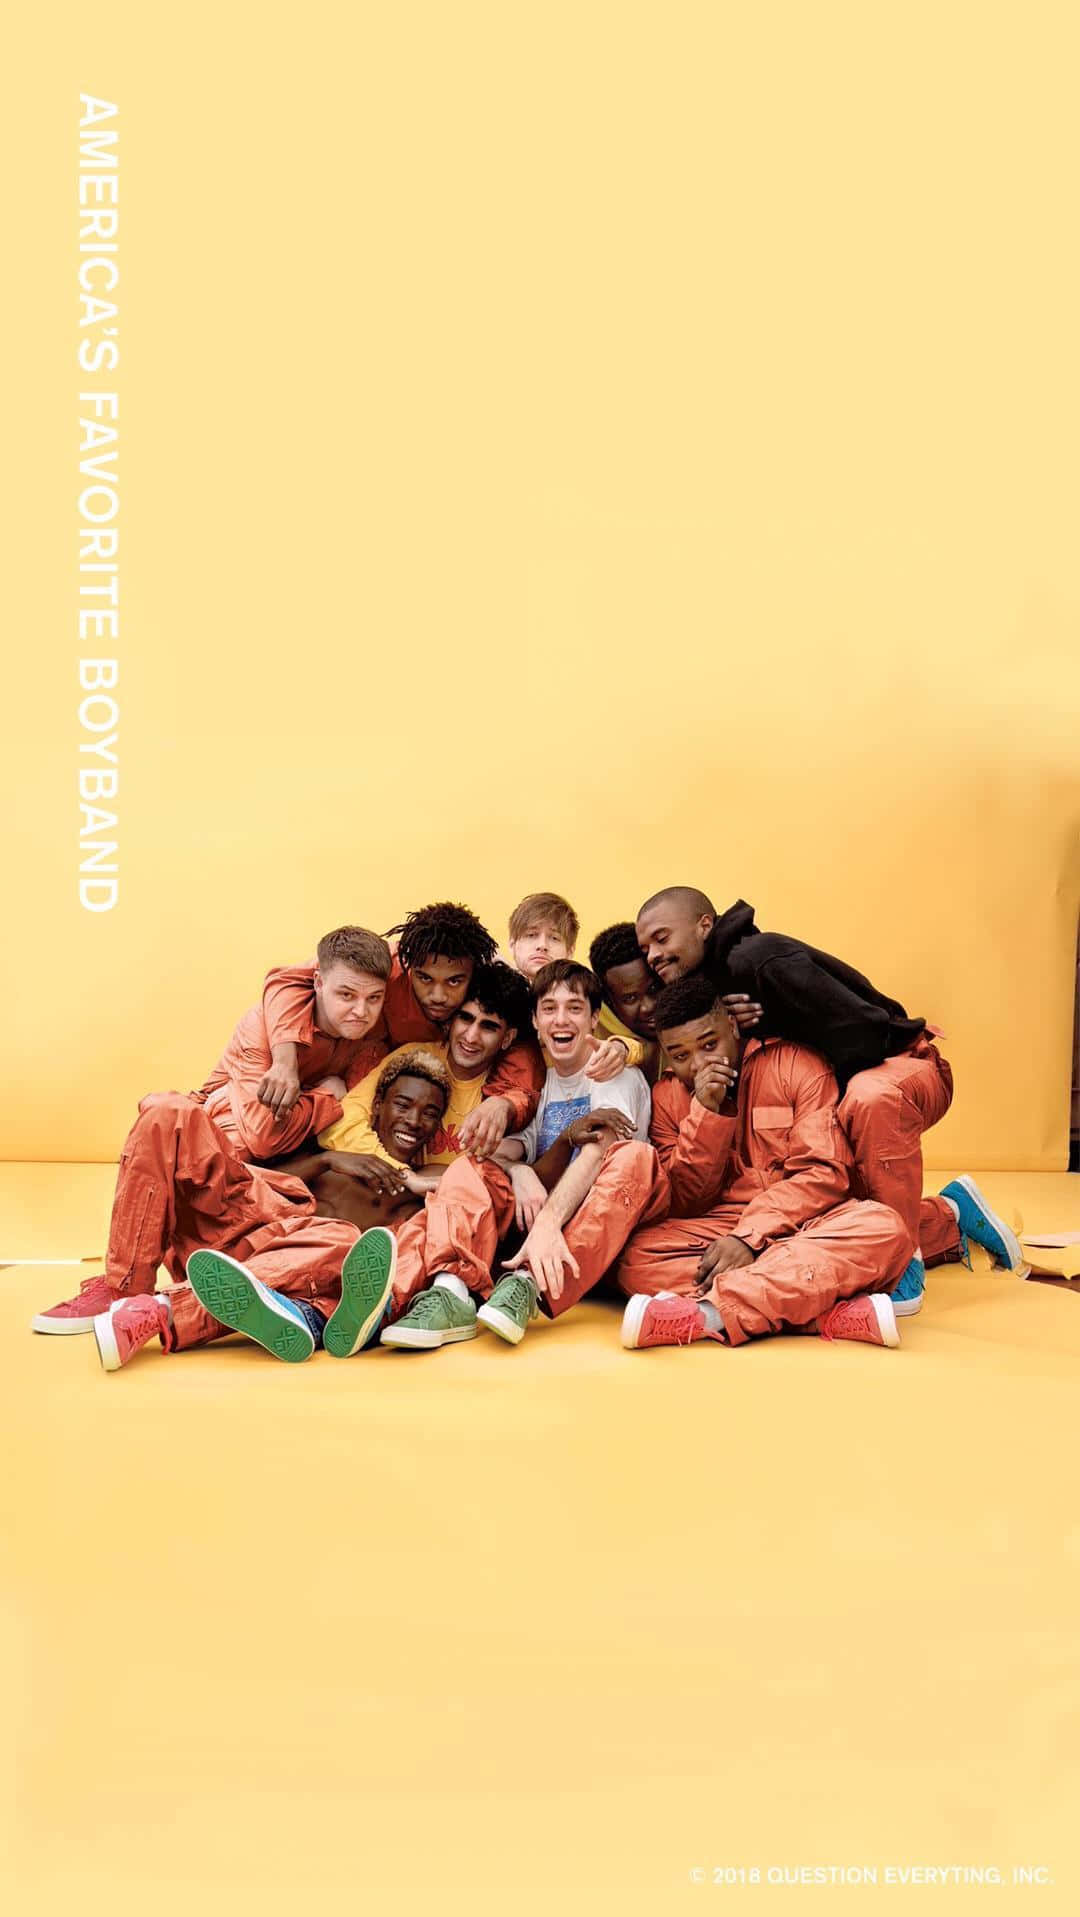 Brockhampton Band Members on a Painted Background Wallpaper